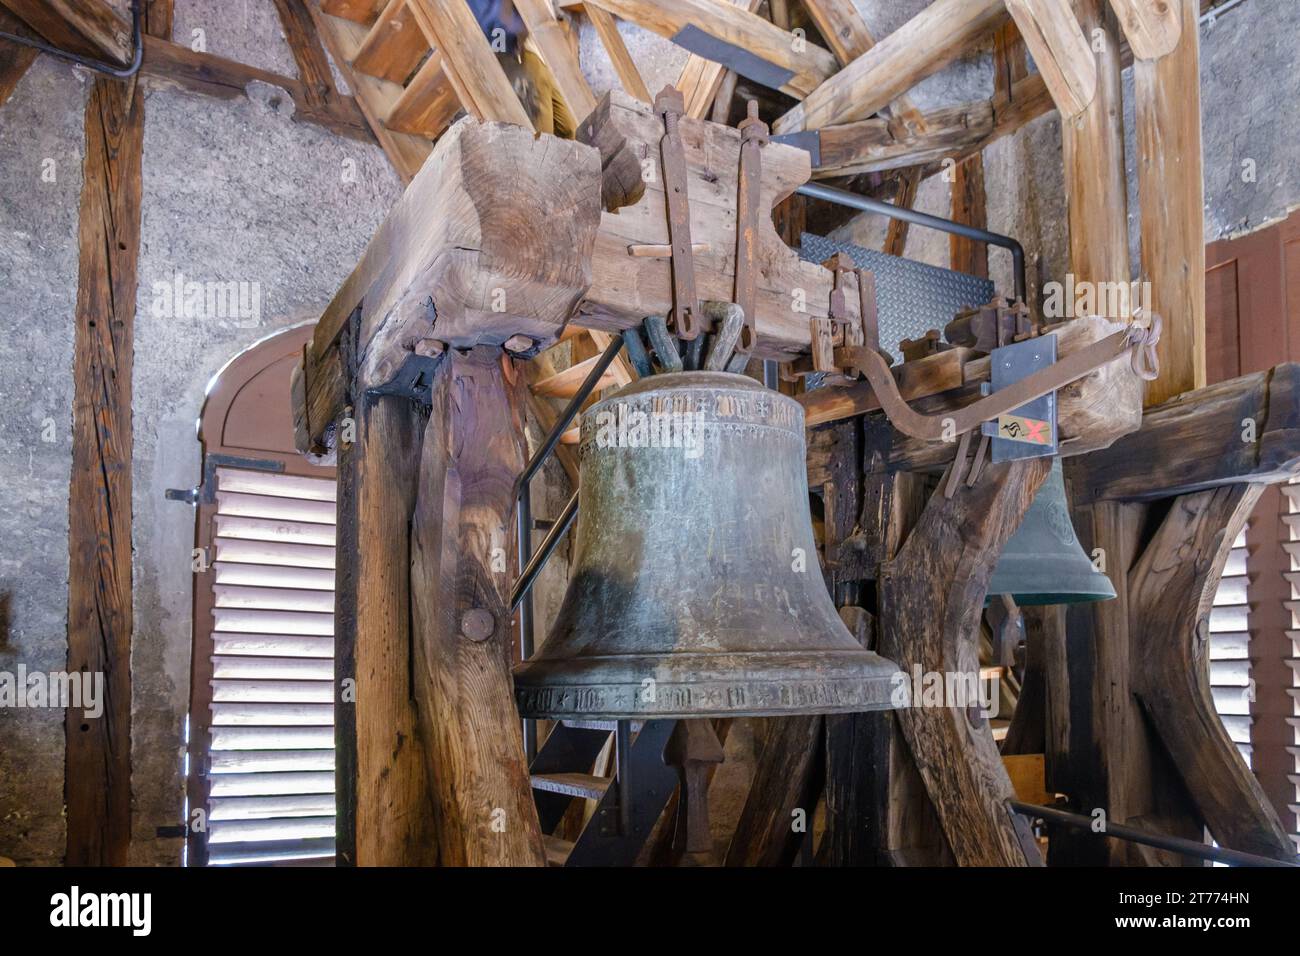 The old church bell inside the belfry at the Augustinian Museum in Rattenberg, Medieval town in Alpbachtal, Tyrol, Austria. Stock Photo